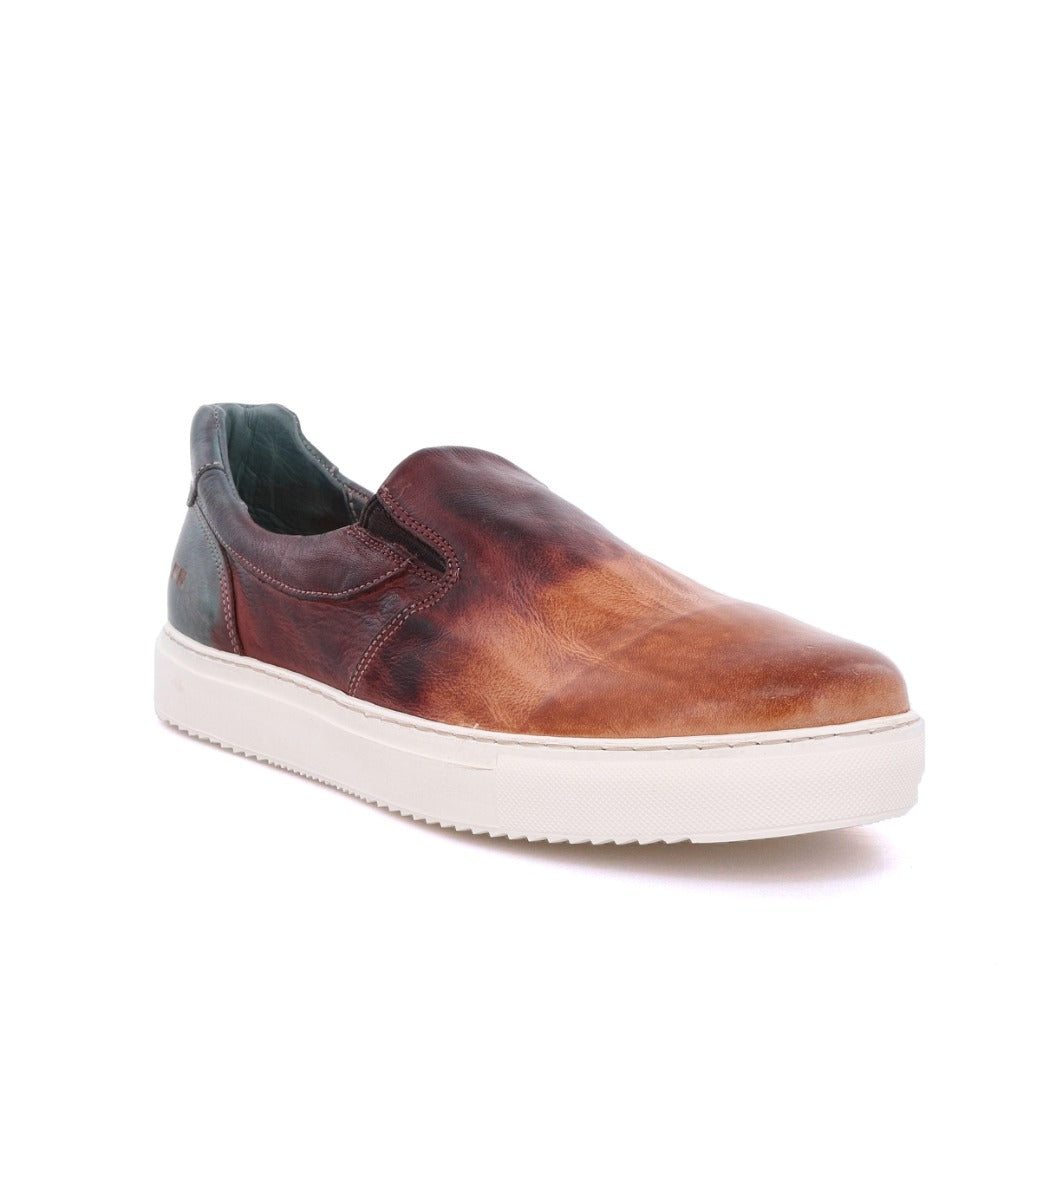 A men's slip on sneaker with a brown leather upper and white sole, the Bed Stu Harry.